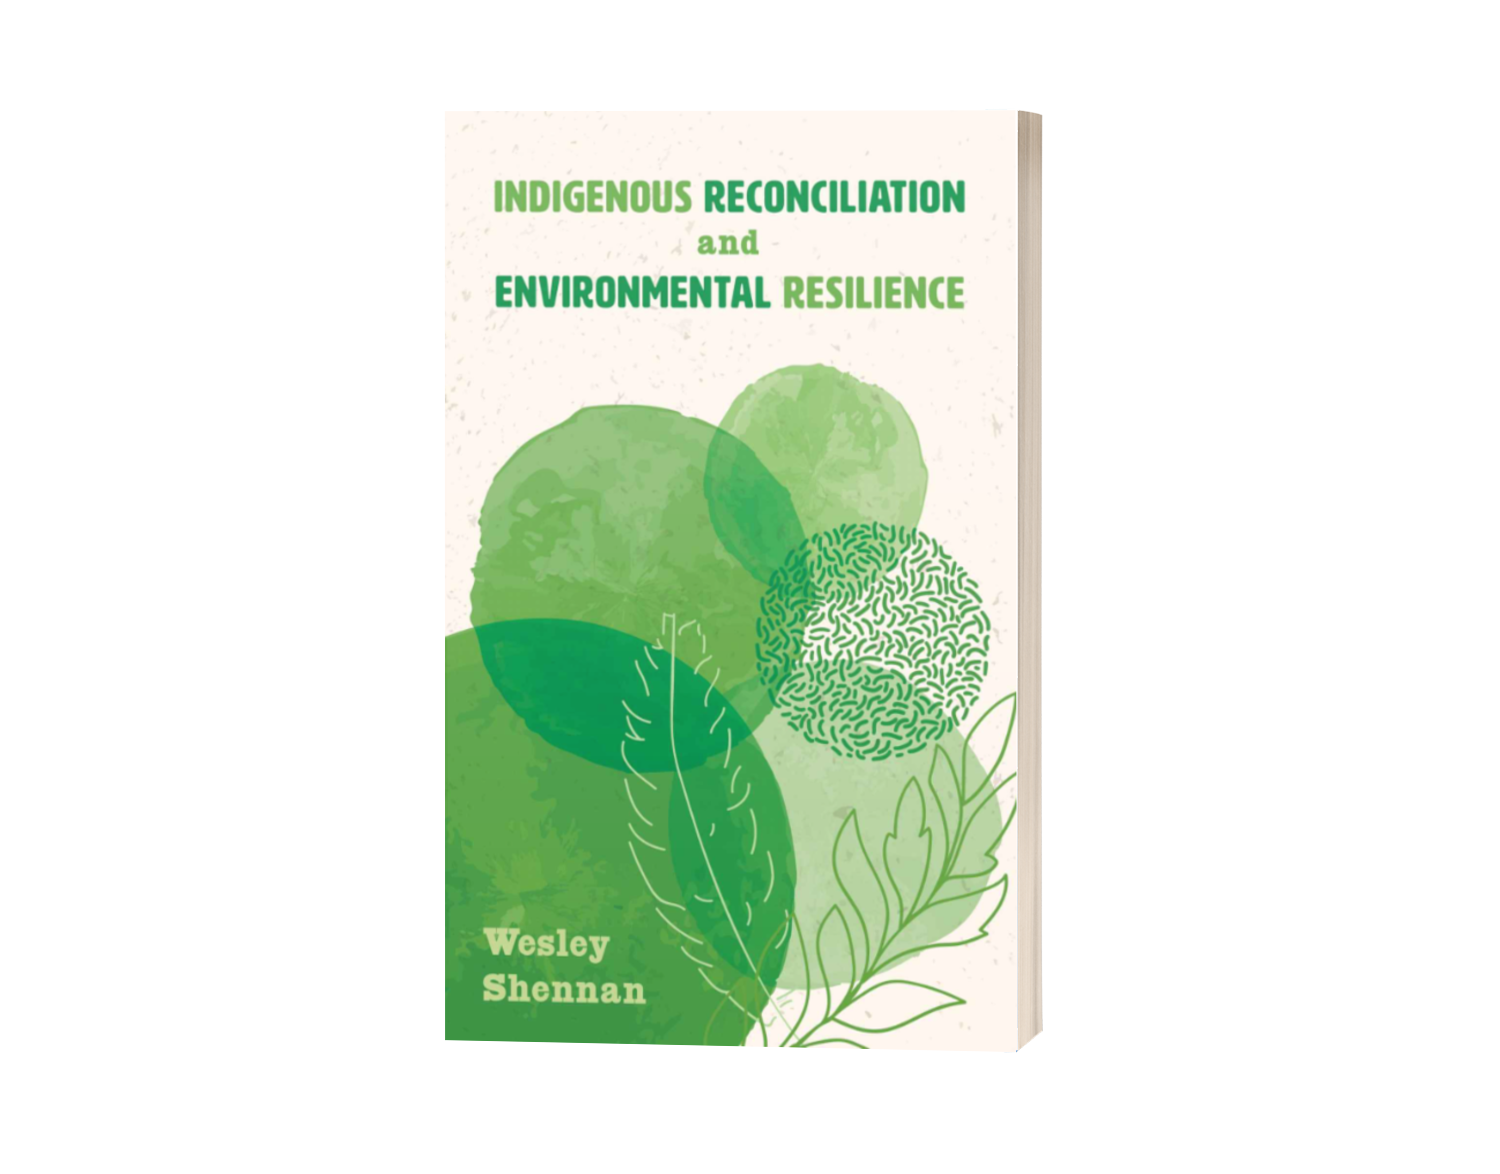 Indigenous Reconciliation and Environmental Resilience by Wesley Shennan